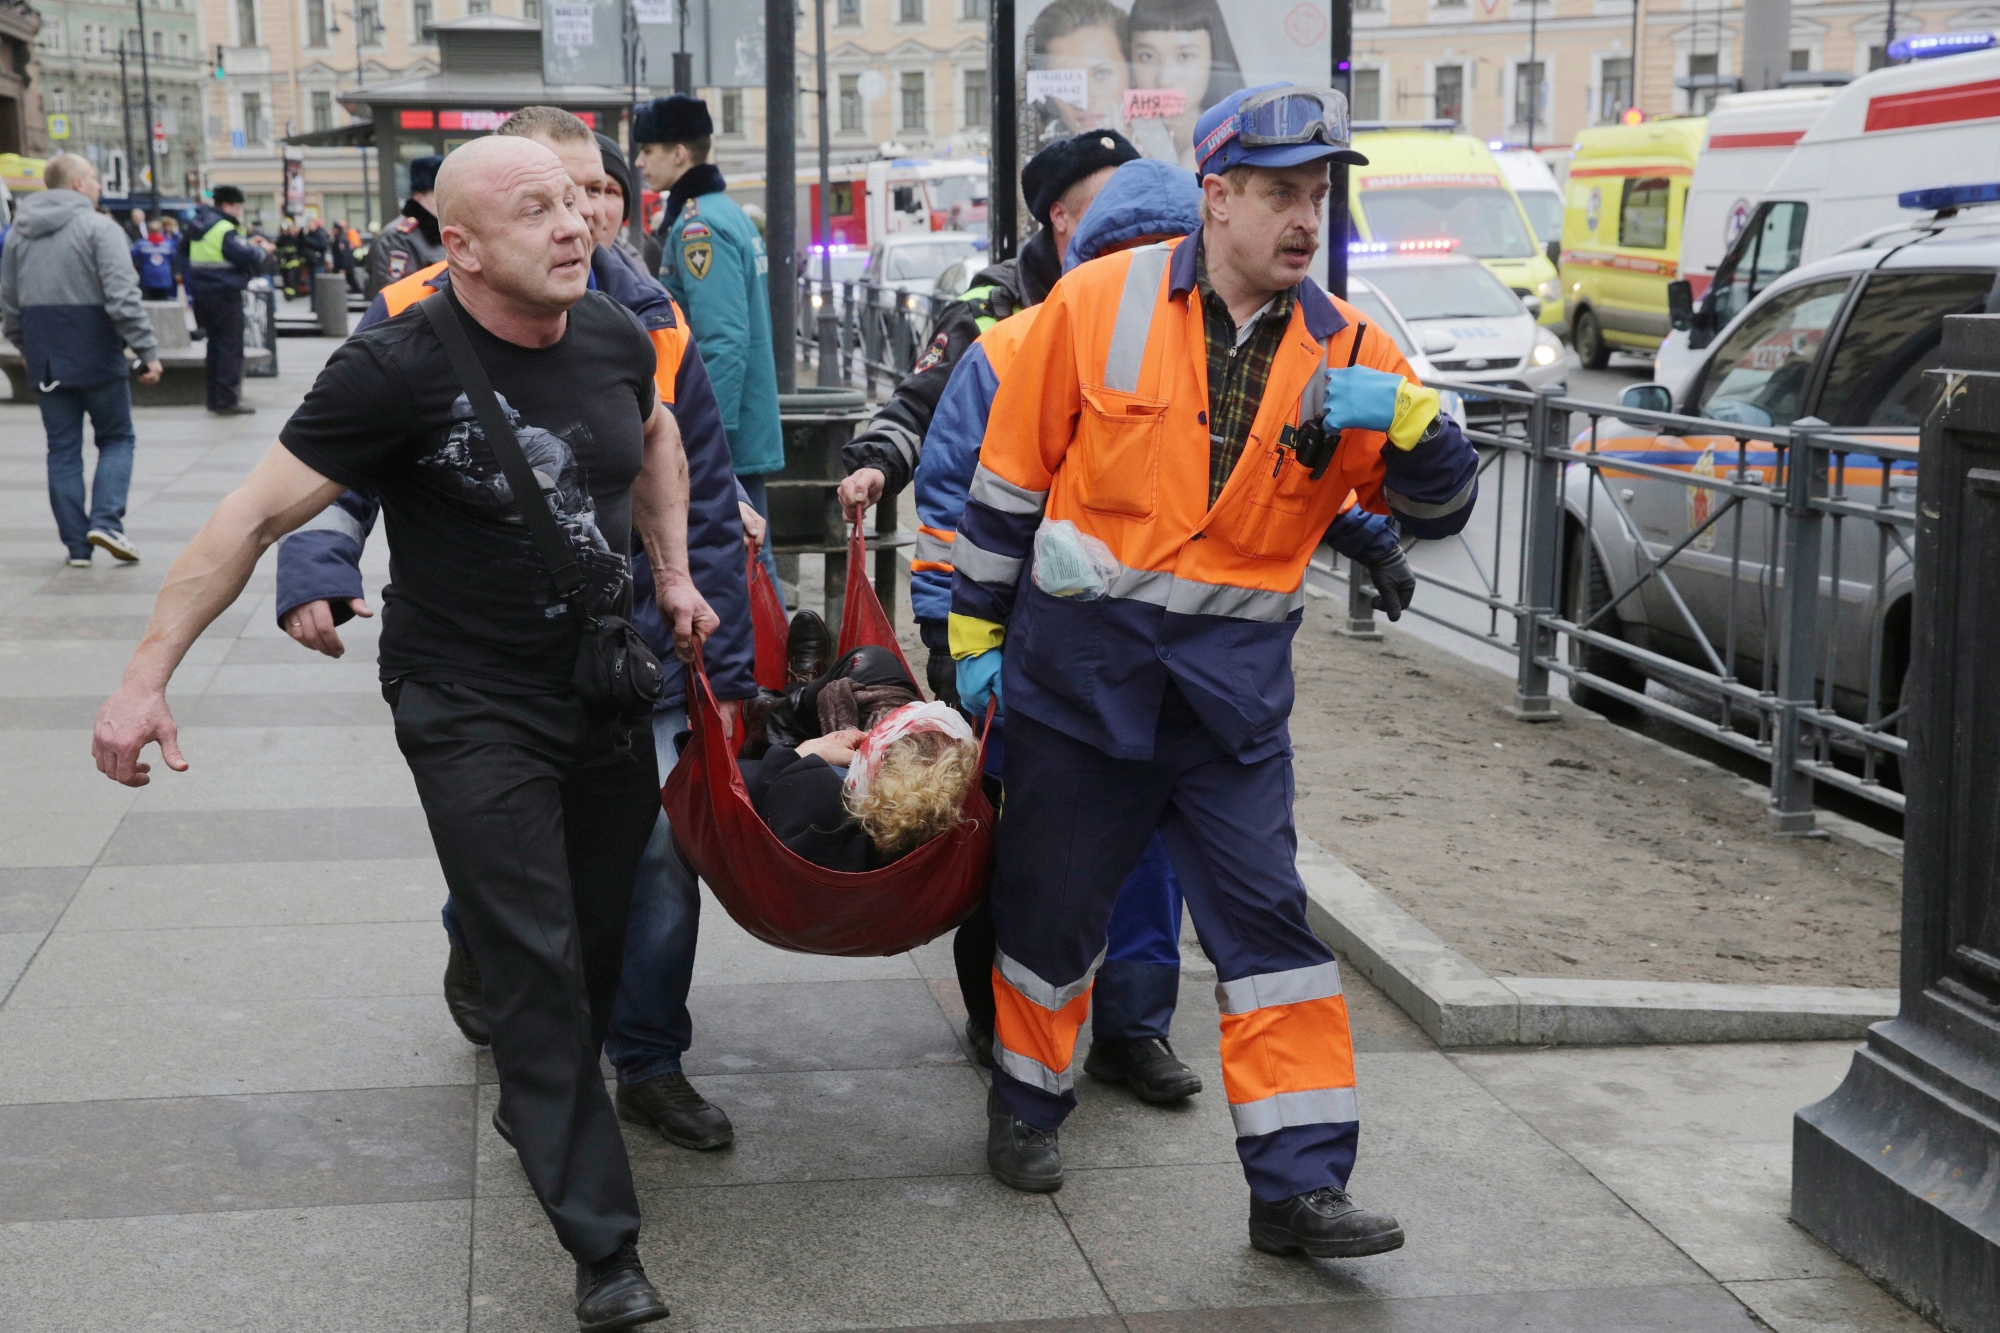 epa05886110 Russian rescuers carry a victim of an explosion at Tekhnologichesky Institute metro station in Saint Petersburg, Russia, 03 April, 2017. According to reports, at least 10 people were killed and dozens injured in an explosion in the city's metro system. The cause of the blast was not immediately known.  EPA/ANTON VAGANOV RUSSIA SAINT PETERSBURG METRO EXPLOSION